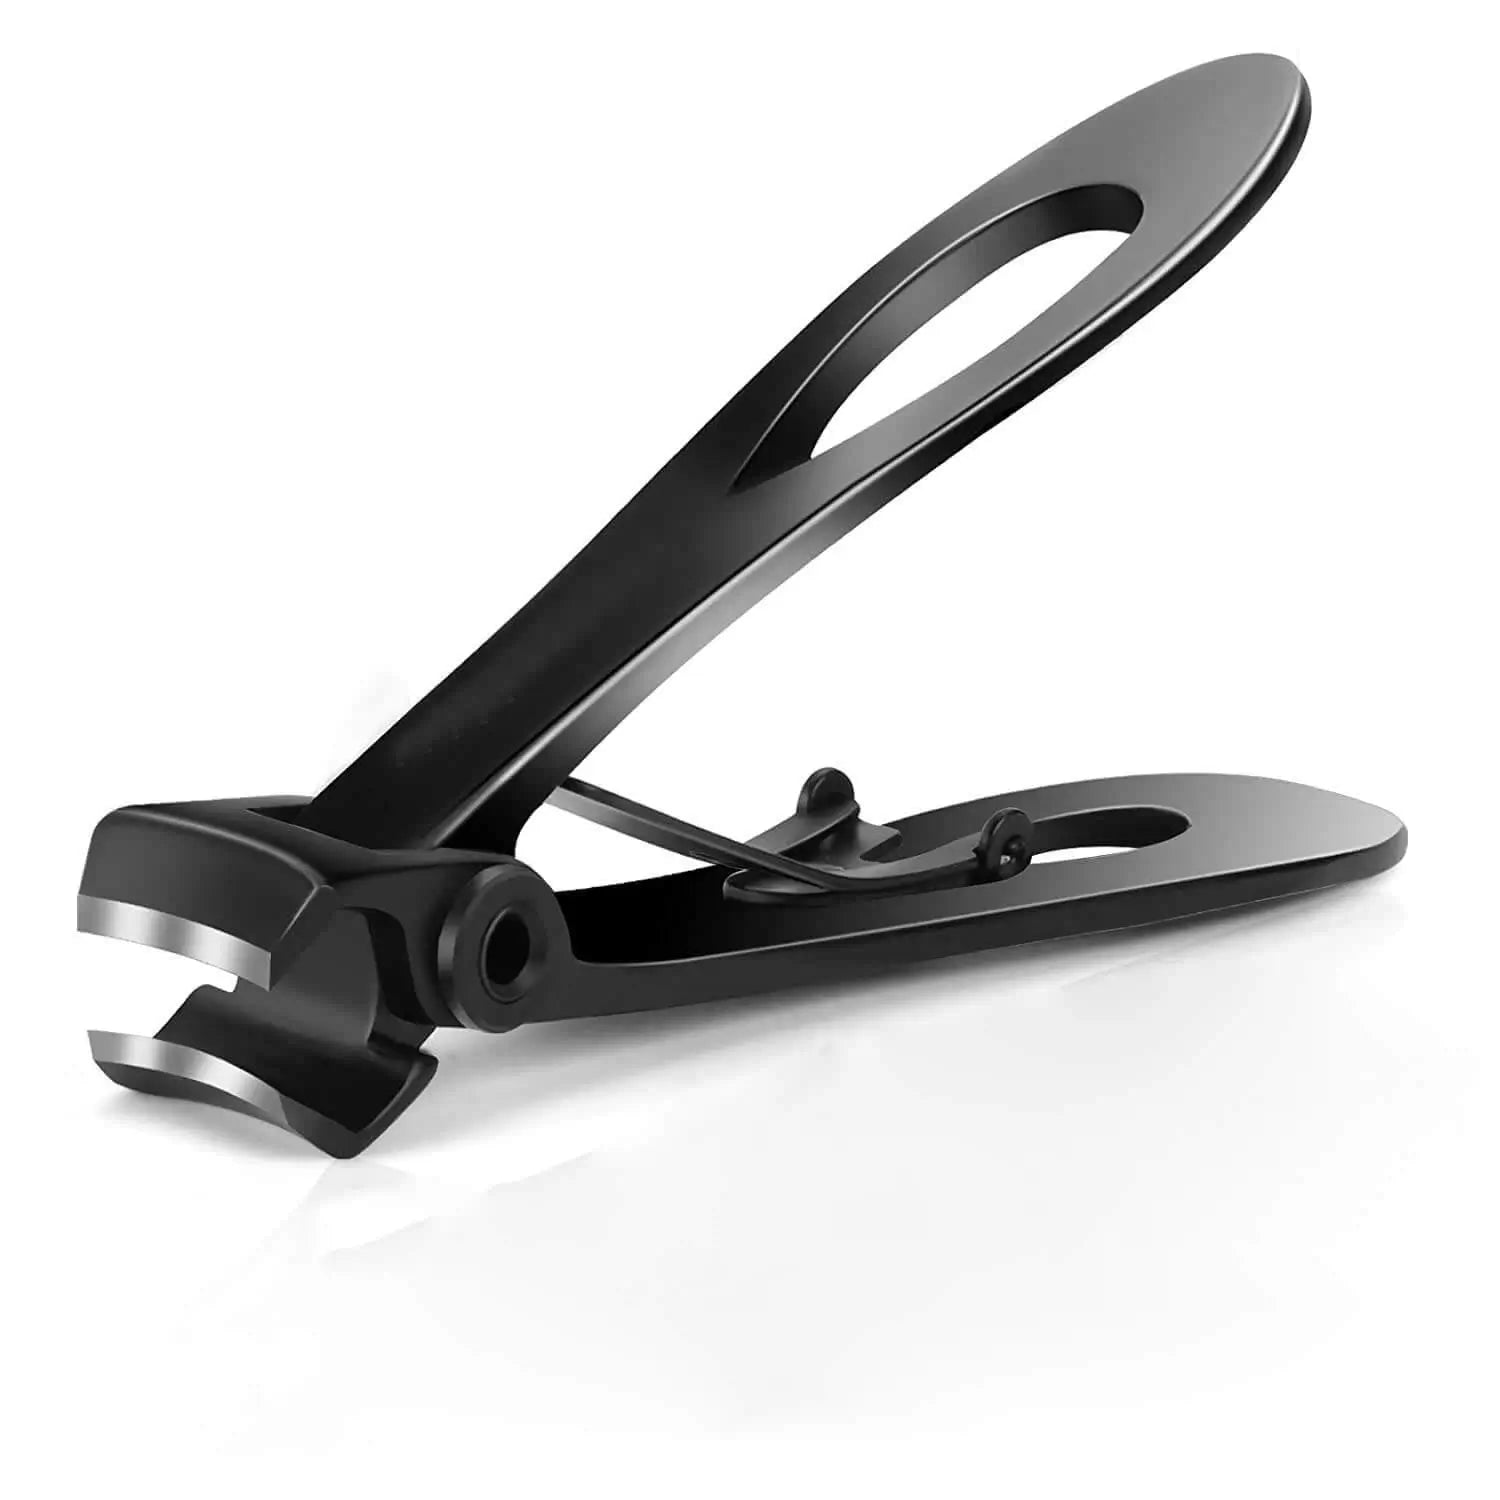 DNS Stainless Steel Nail Clipper - Black Curve Blade #79001